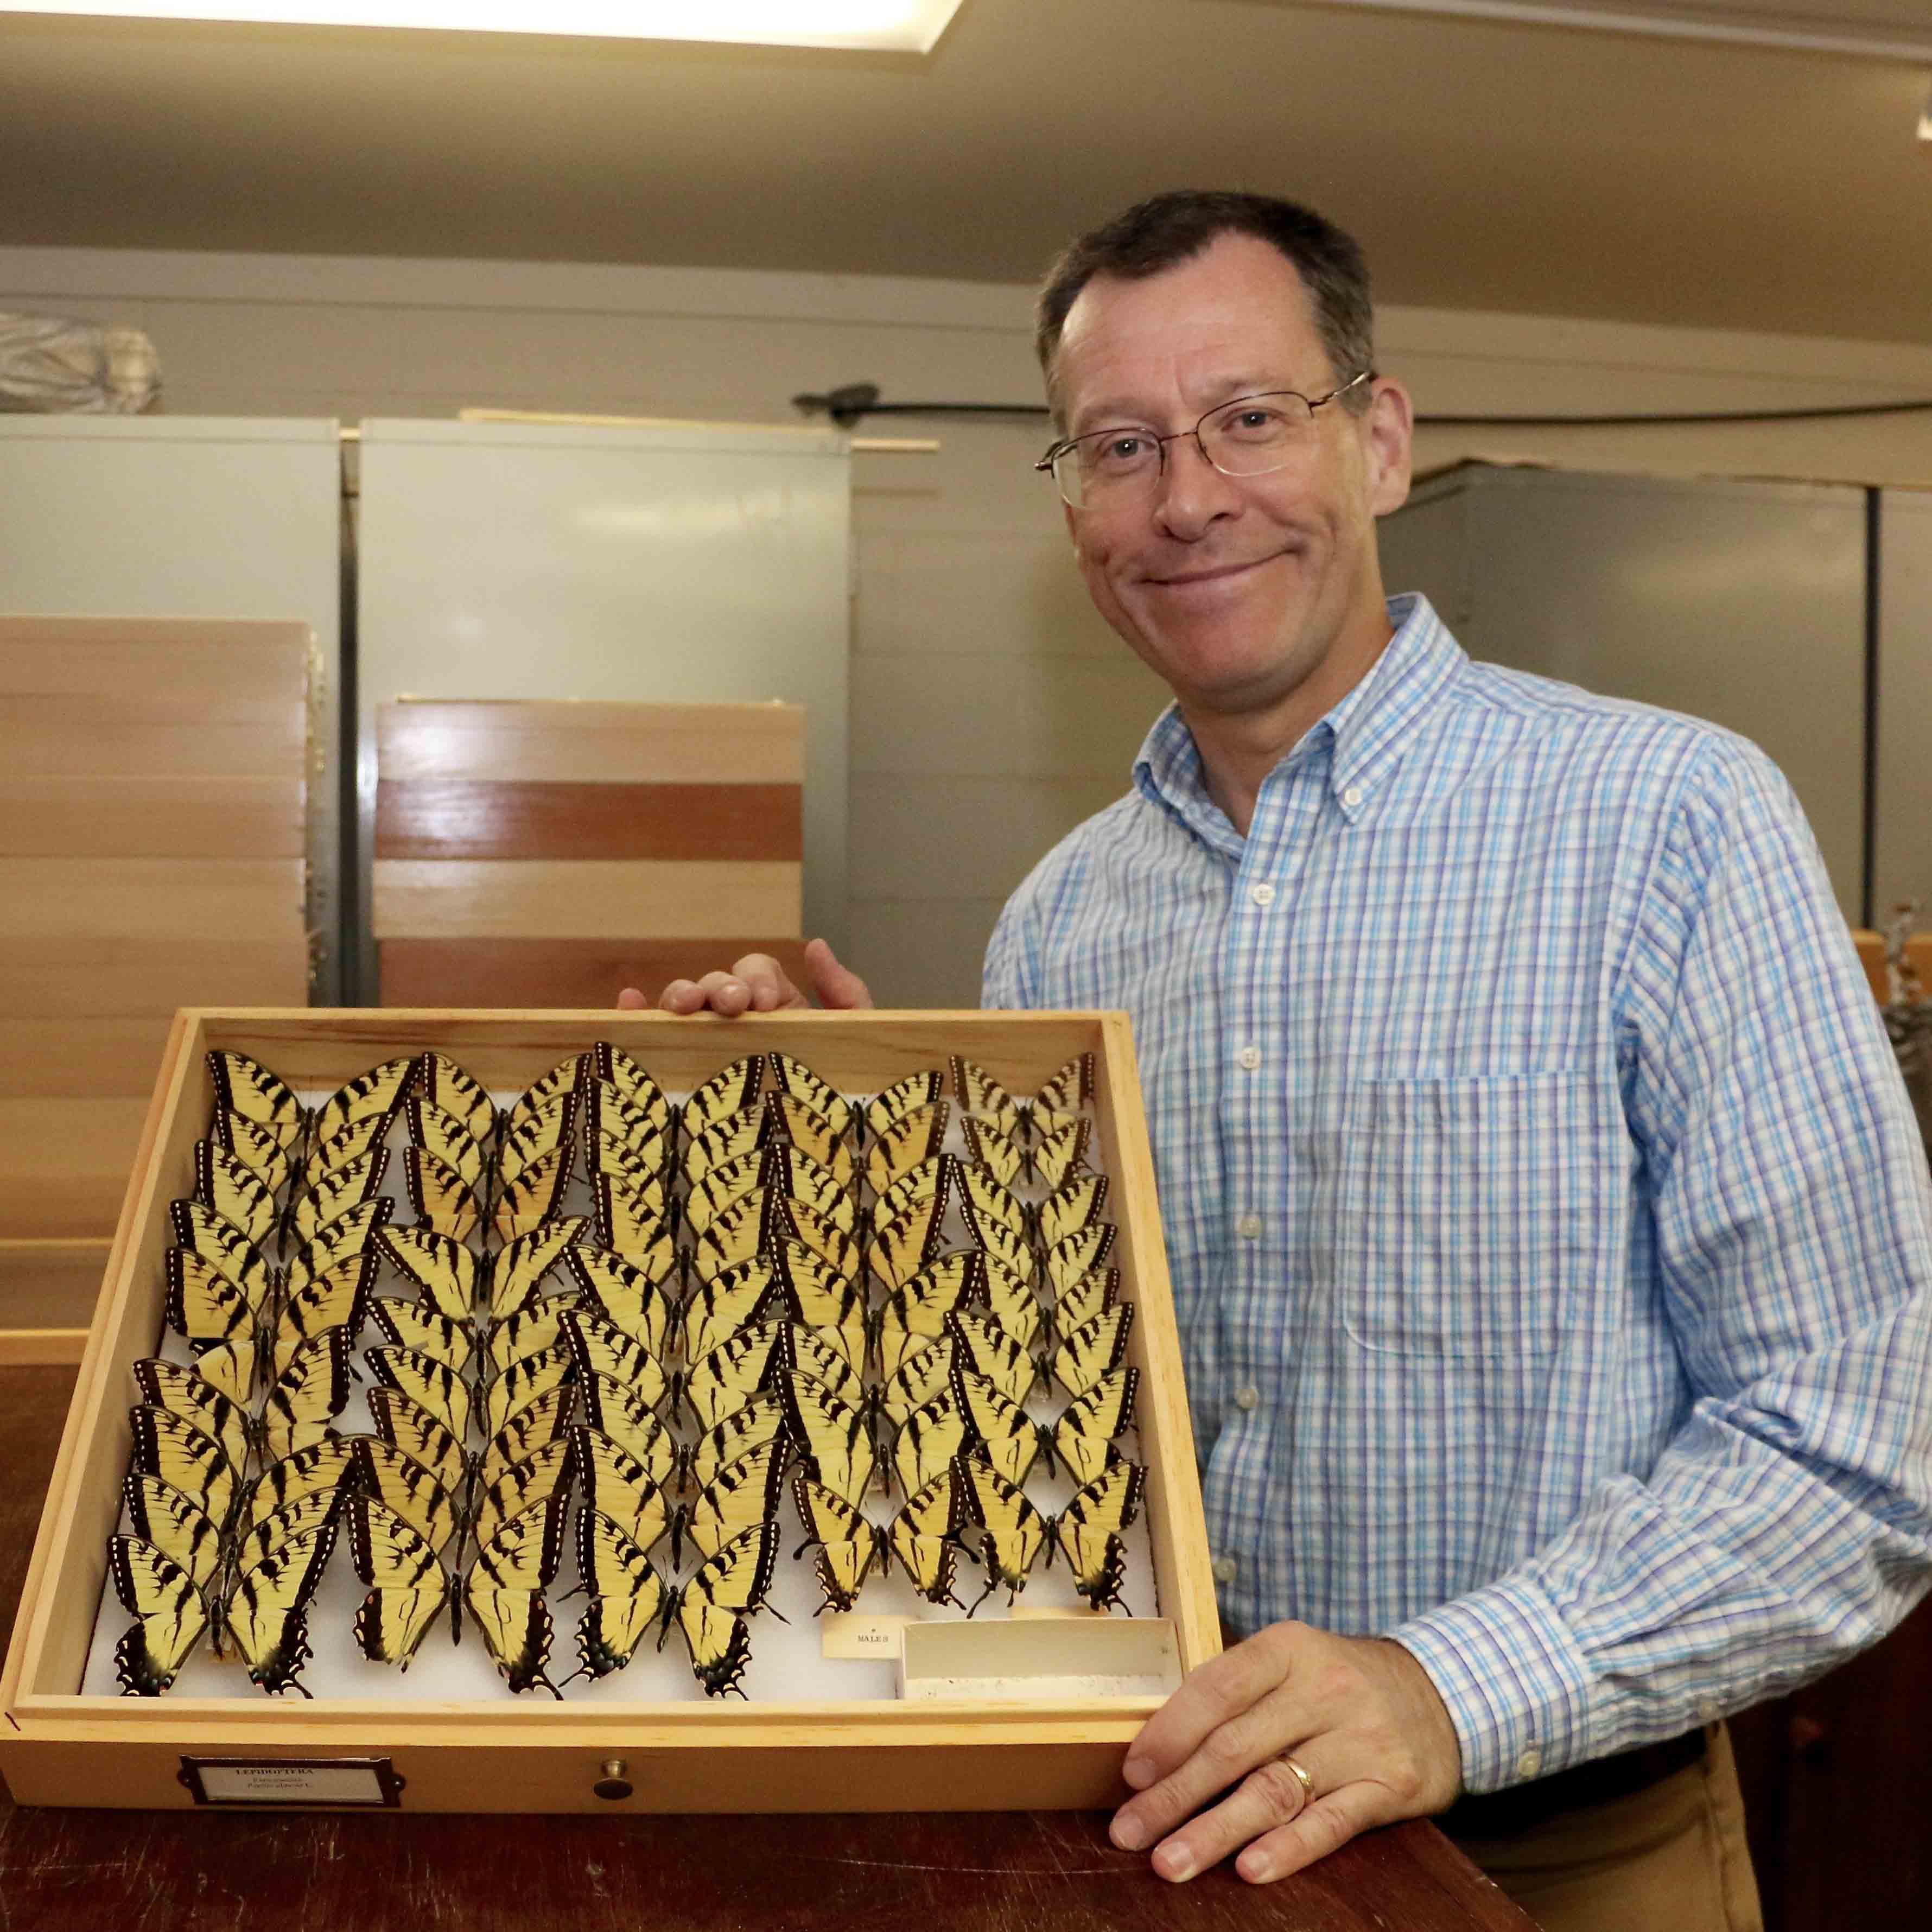 Joe McHugh, professor of entomology at the UGA College of Agricultural and Environmental Sciences and curator of the arthropod collection at the Georgia Museum of Natural History, is helping to lead a large multi-institution effort to digitize millions of butterfly and moth specimens across North America.